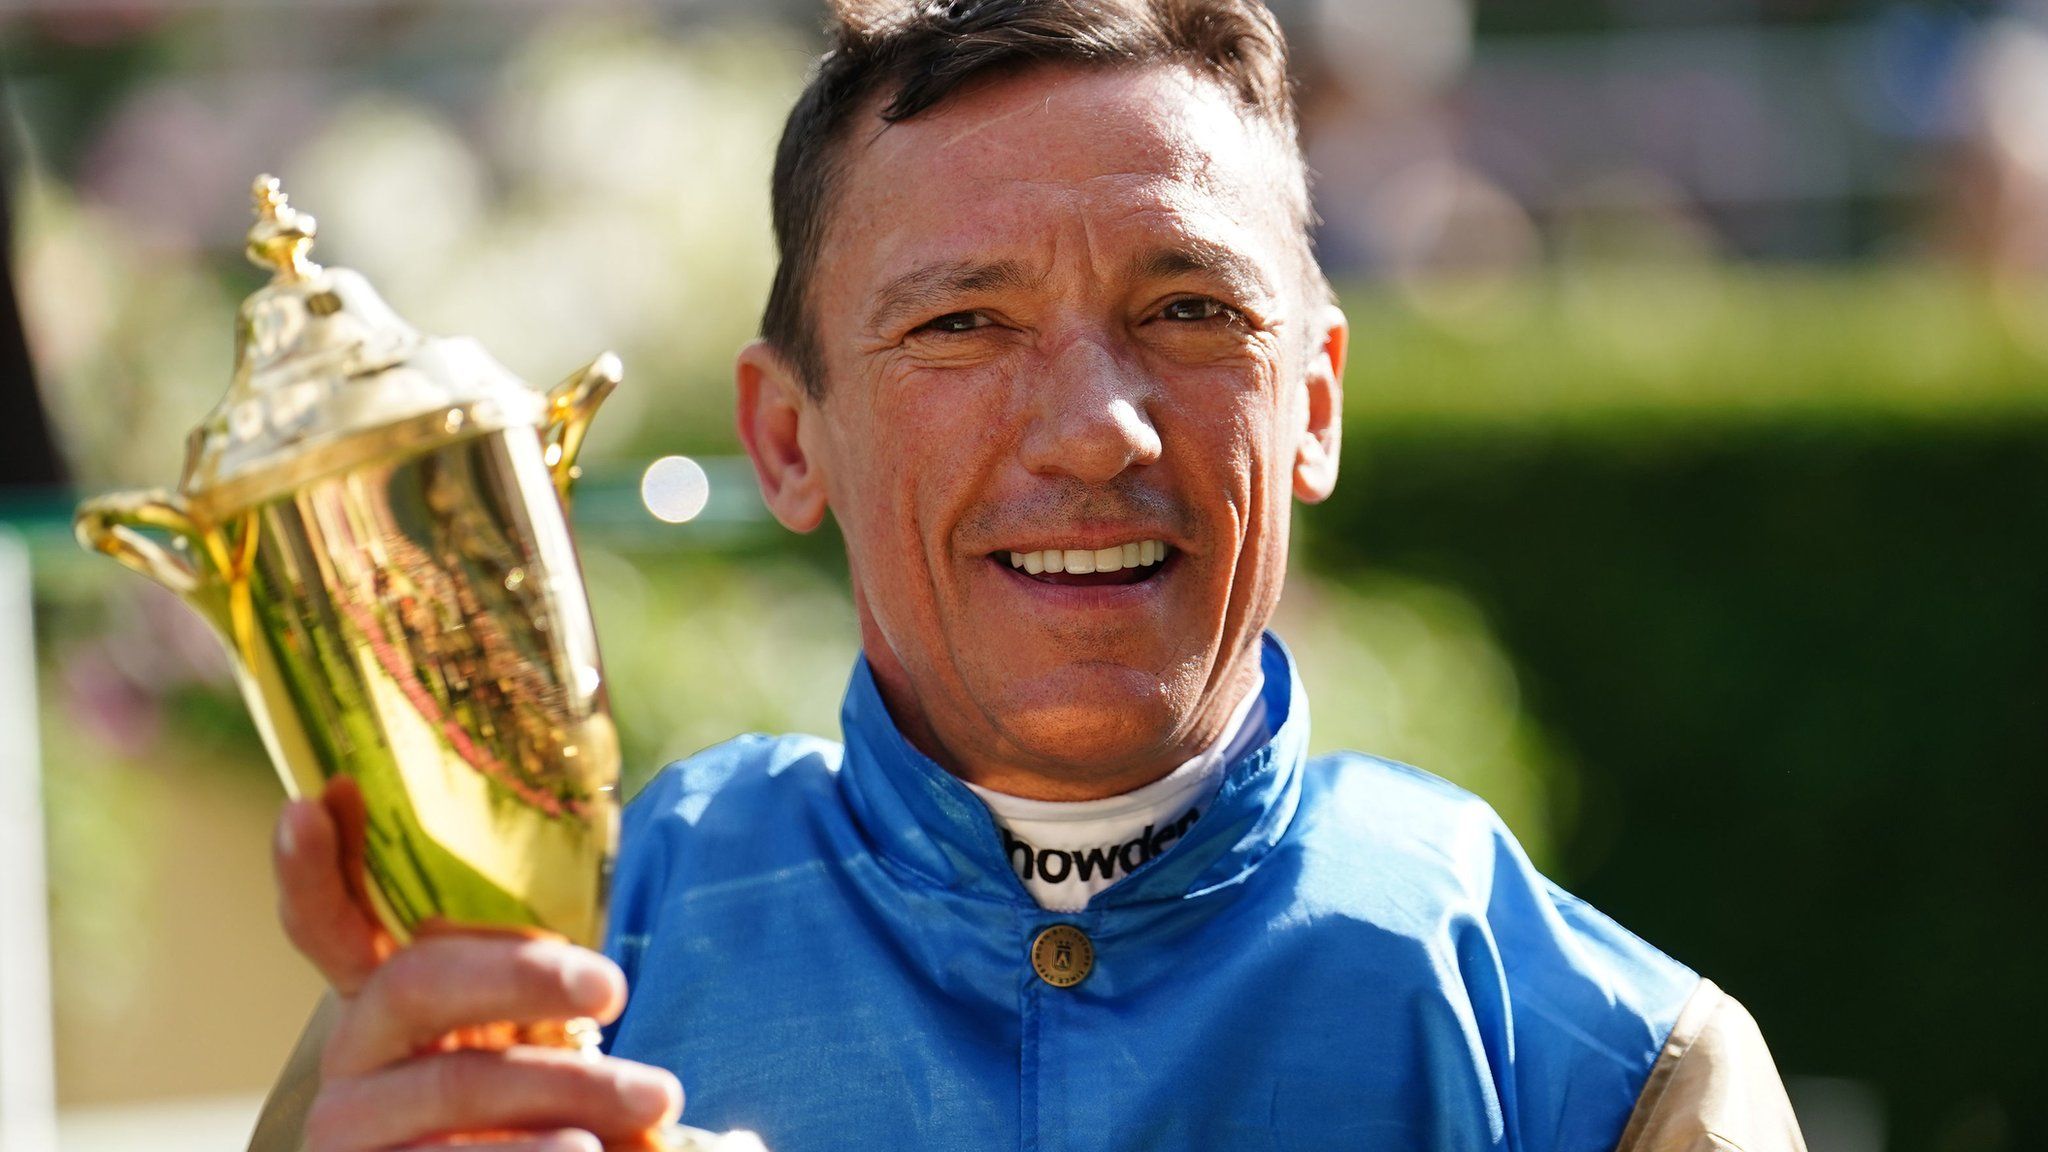 Frankie Dettori with the Queen's Vase after winning at Royal Ascot on Gregory